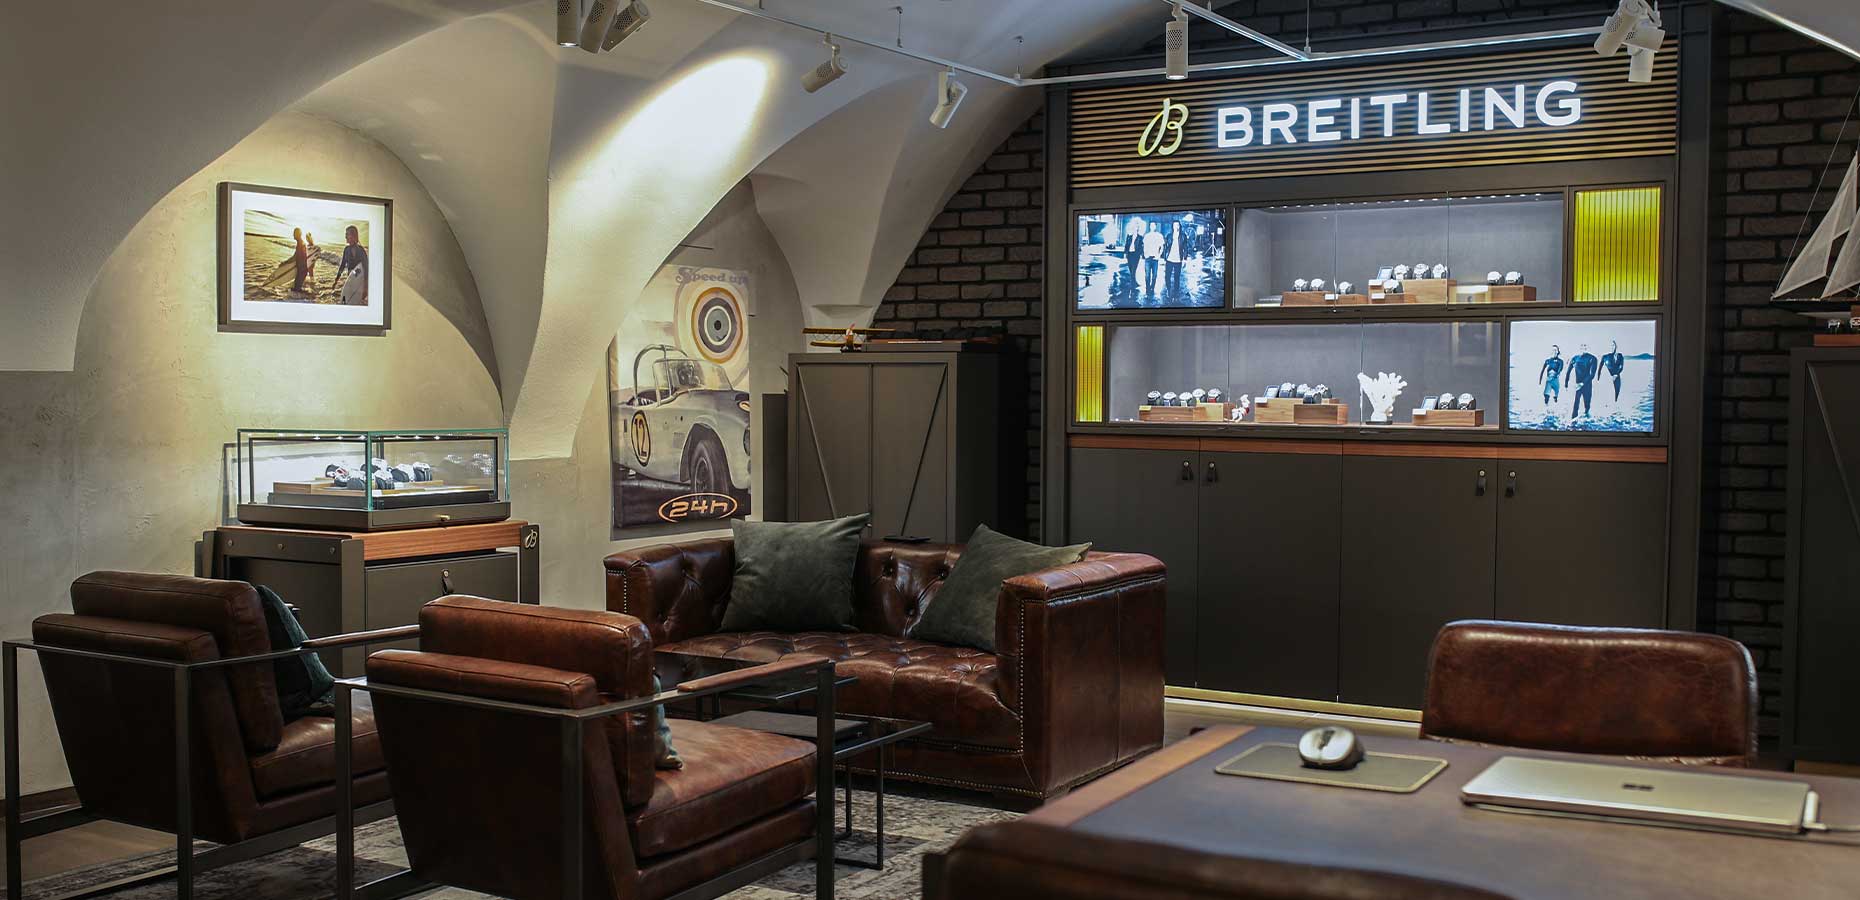  Breitling Concept Store